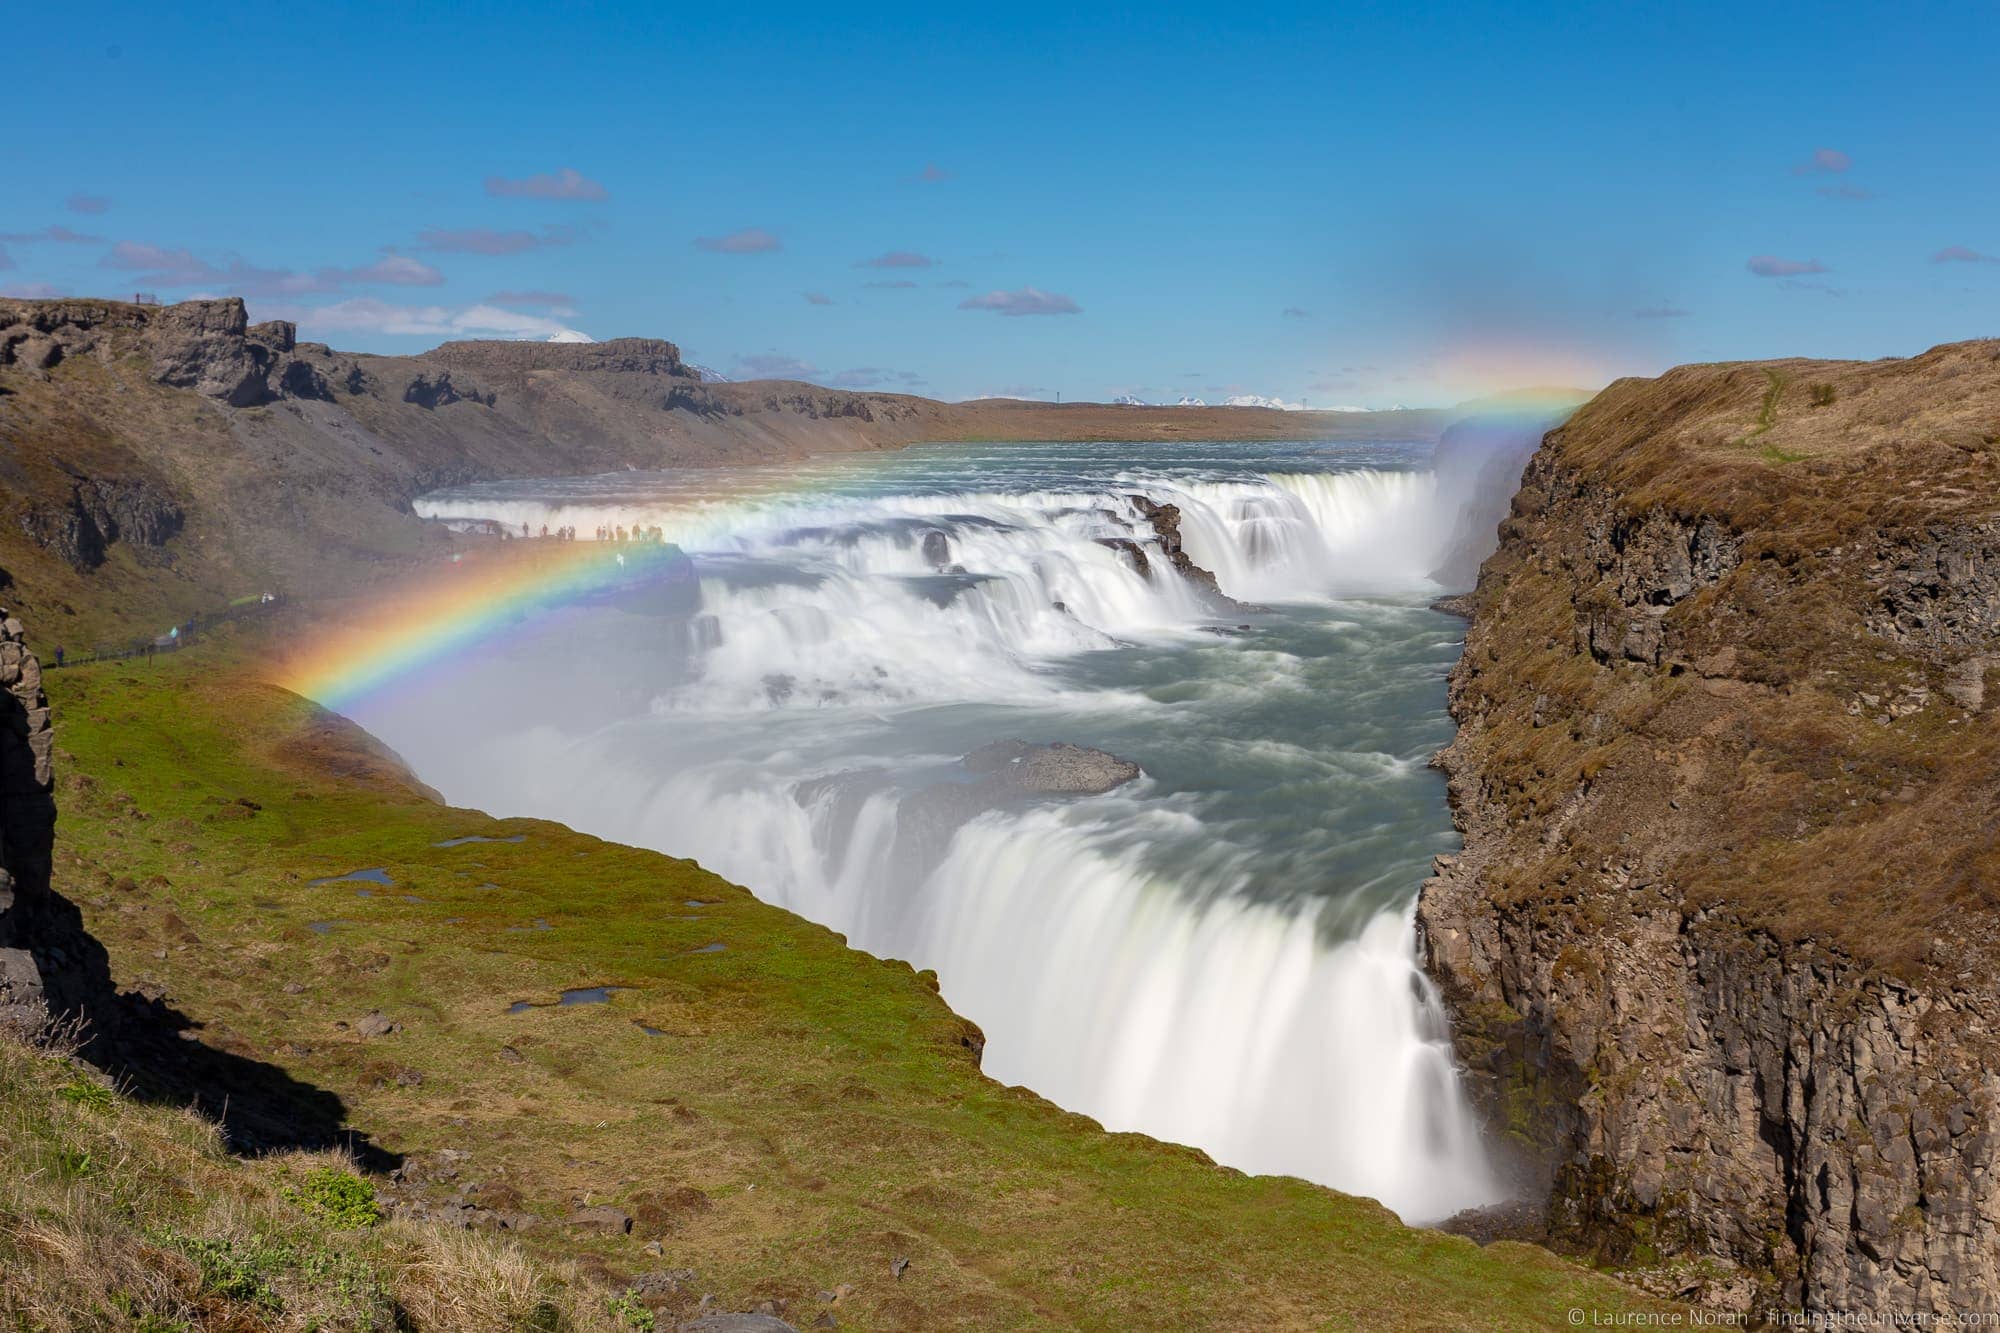 7-Day Iceland Ring Road Itinerary: where to go, how to plan